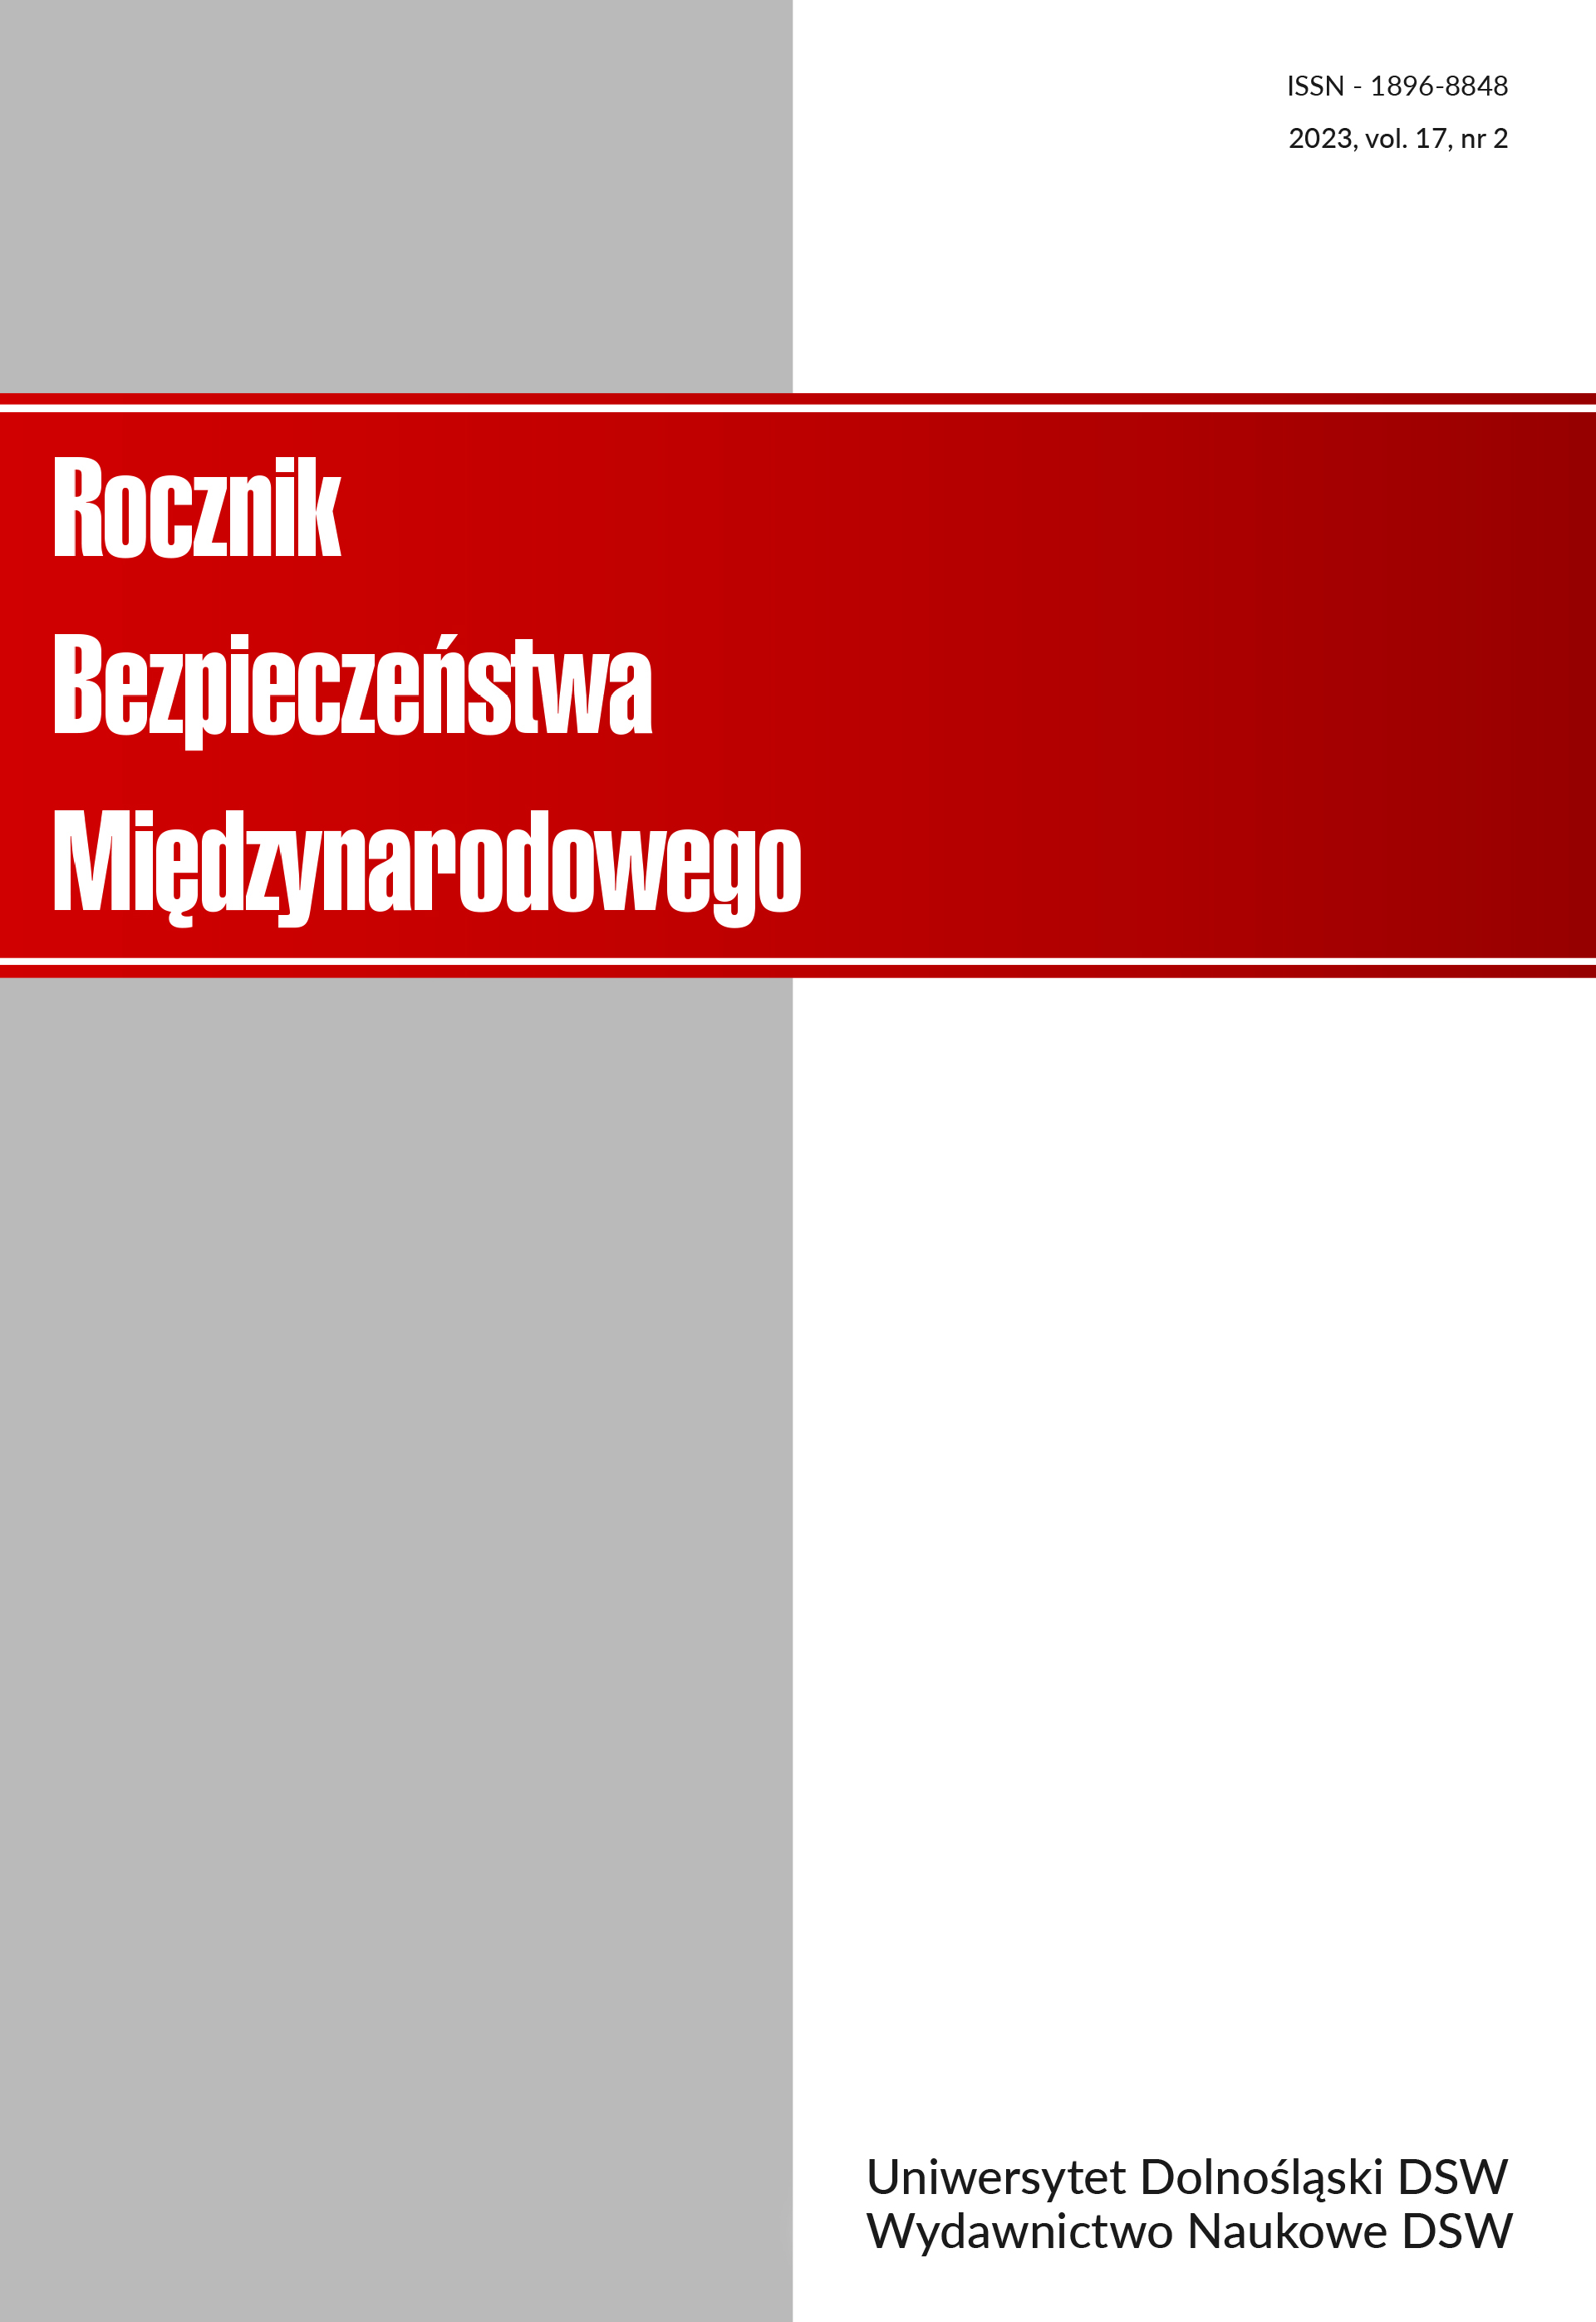 Reporting War in the Context of Security - Comparative Study of Polish and Ukrainian Journalists Cover Image